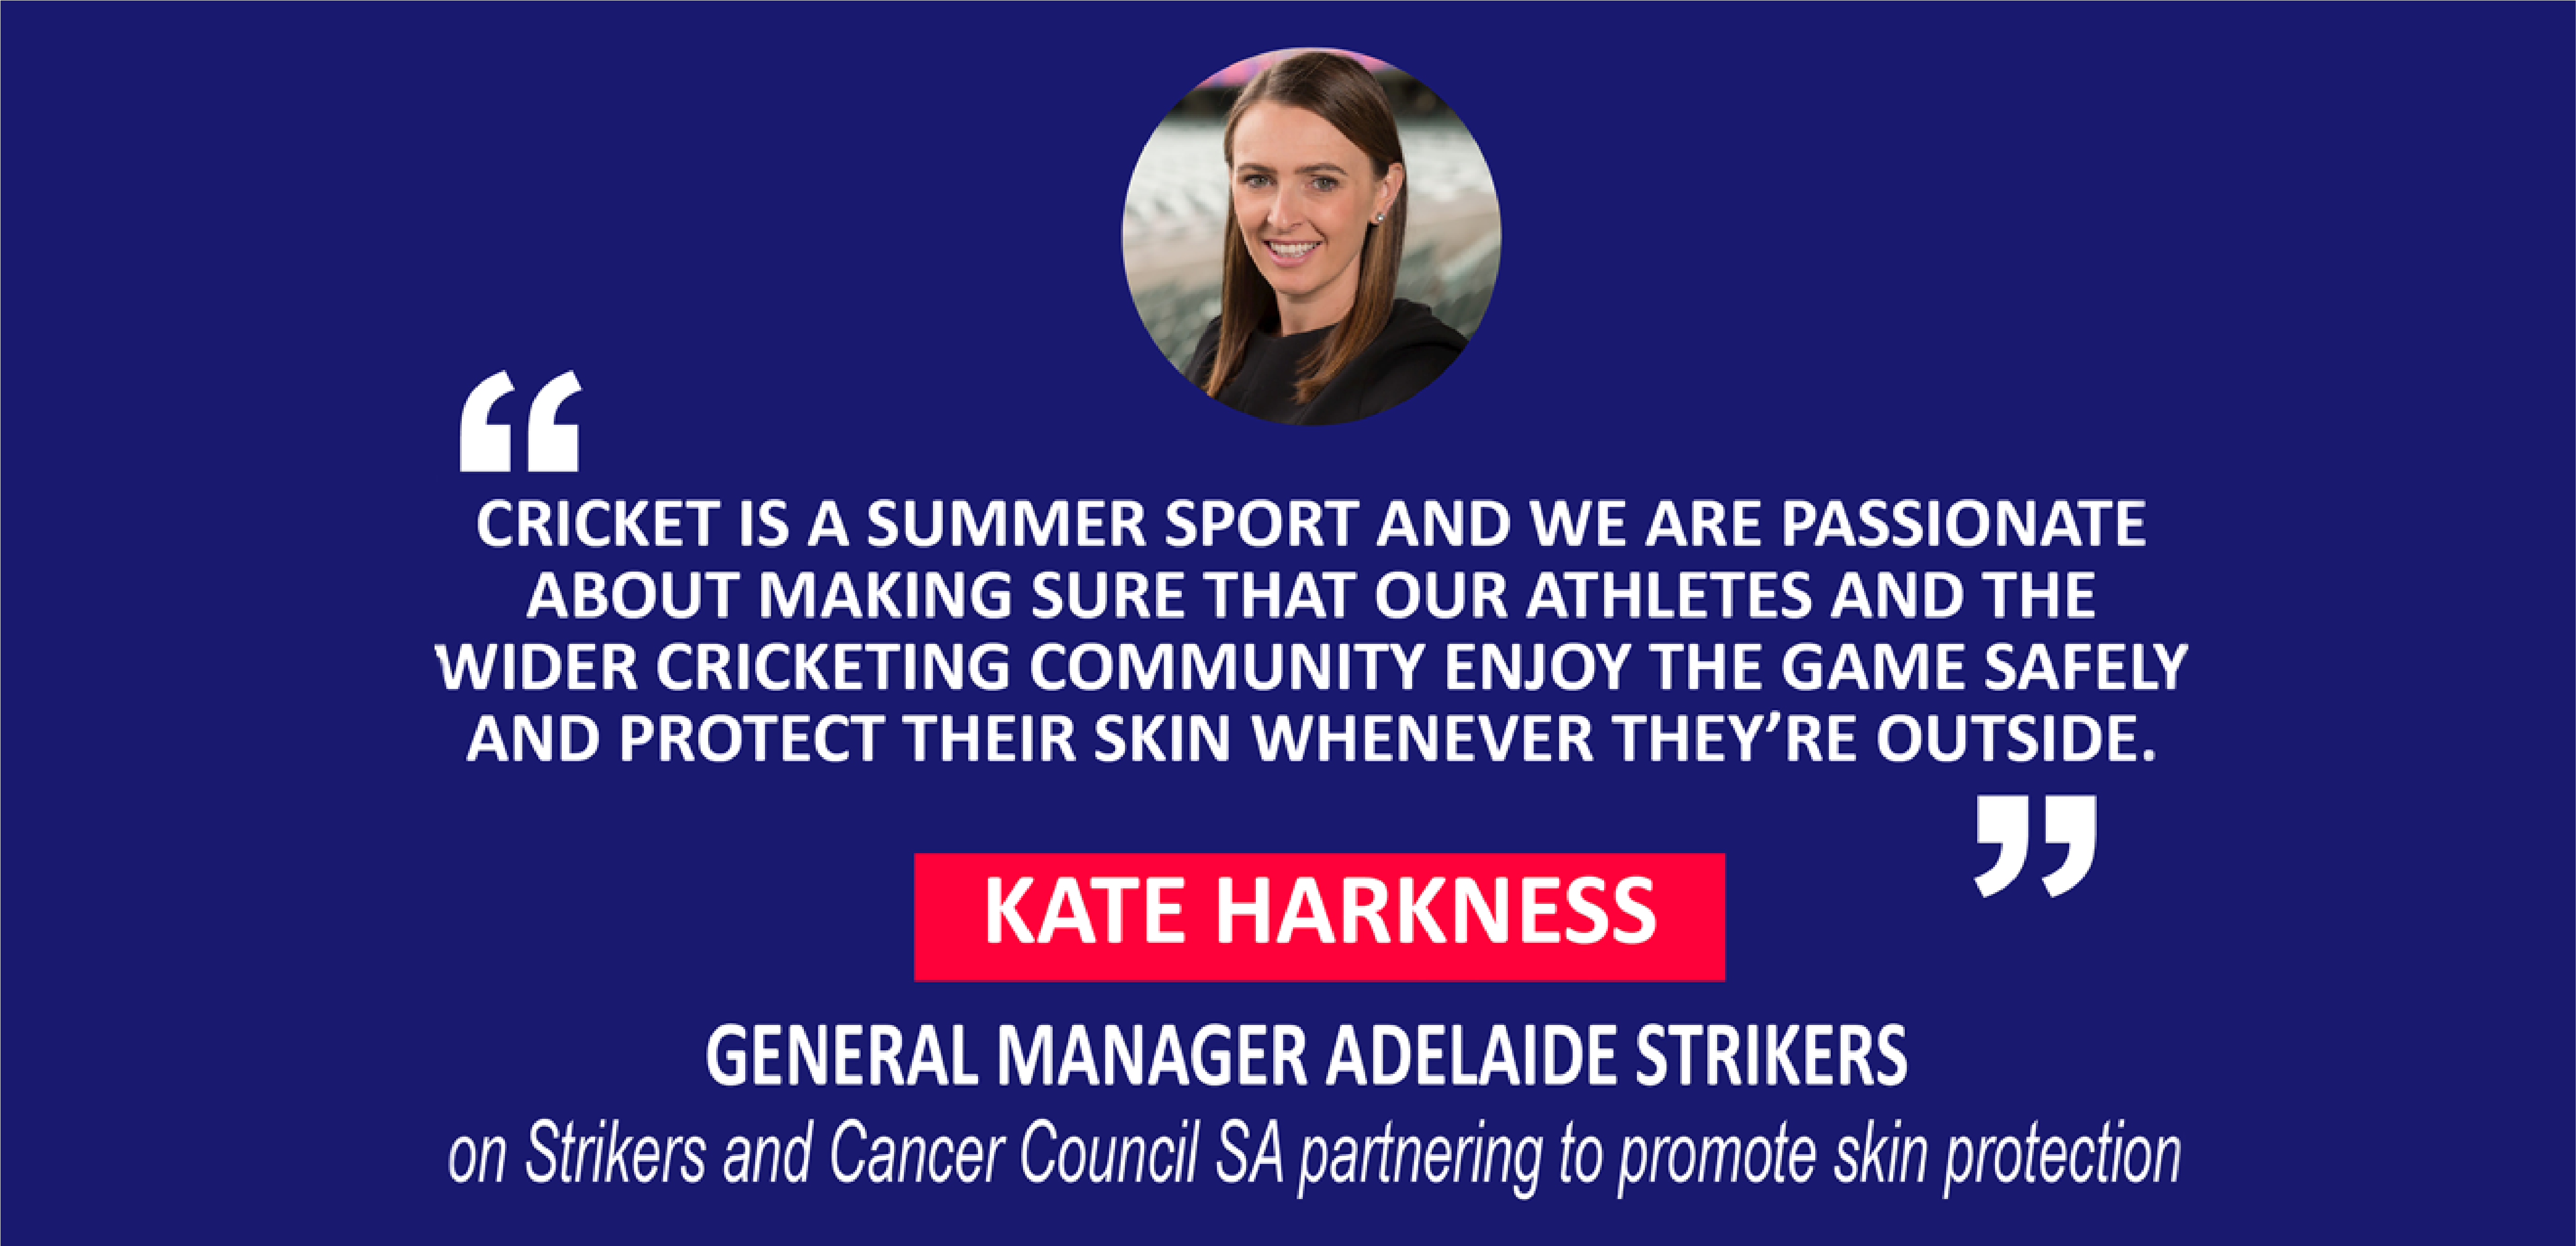 Kate Harkness, General Manager Adelaide Strikers on Adelaide Strikers and Cancer Council SA joining forces to urge Australians to protect their skin